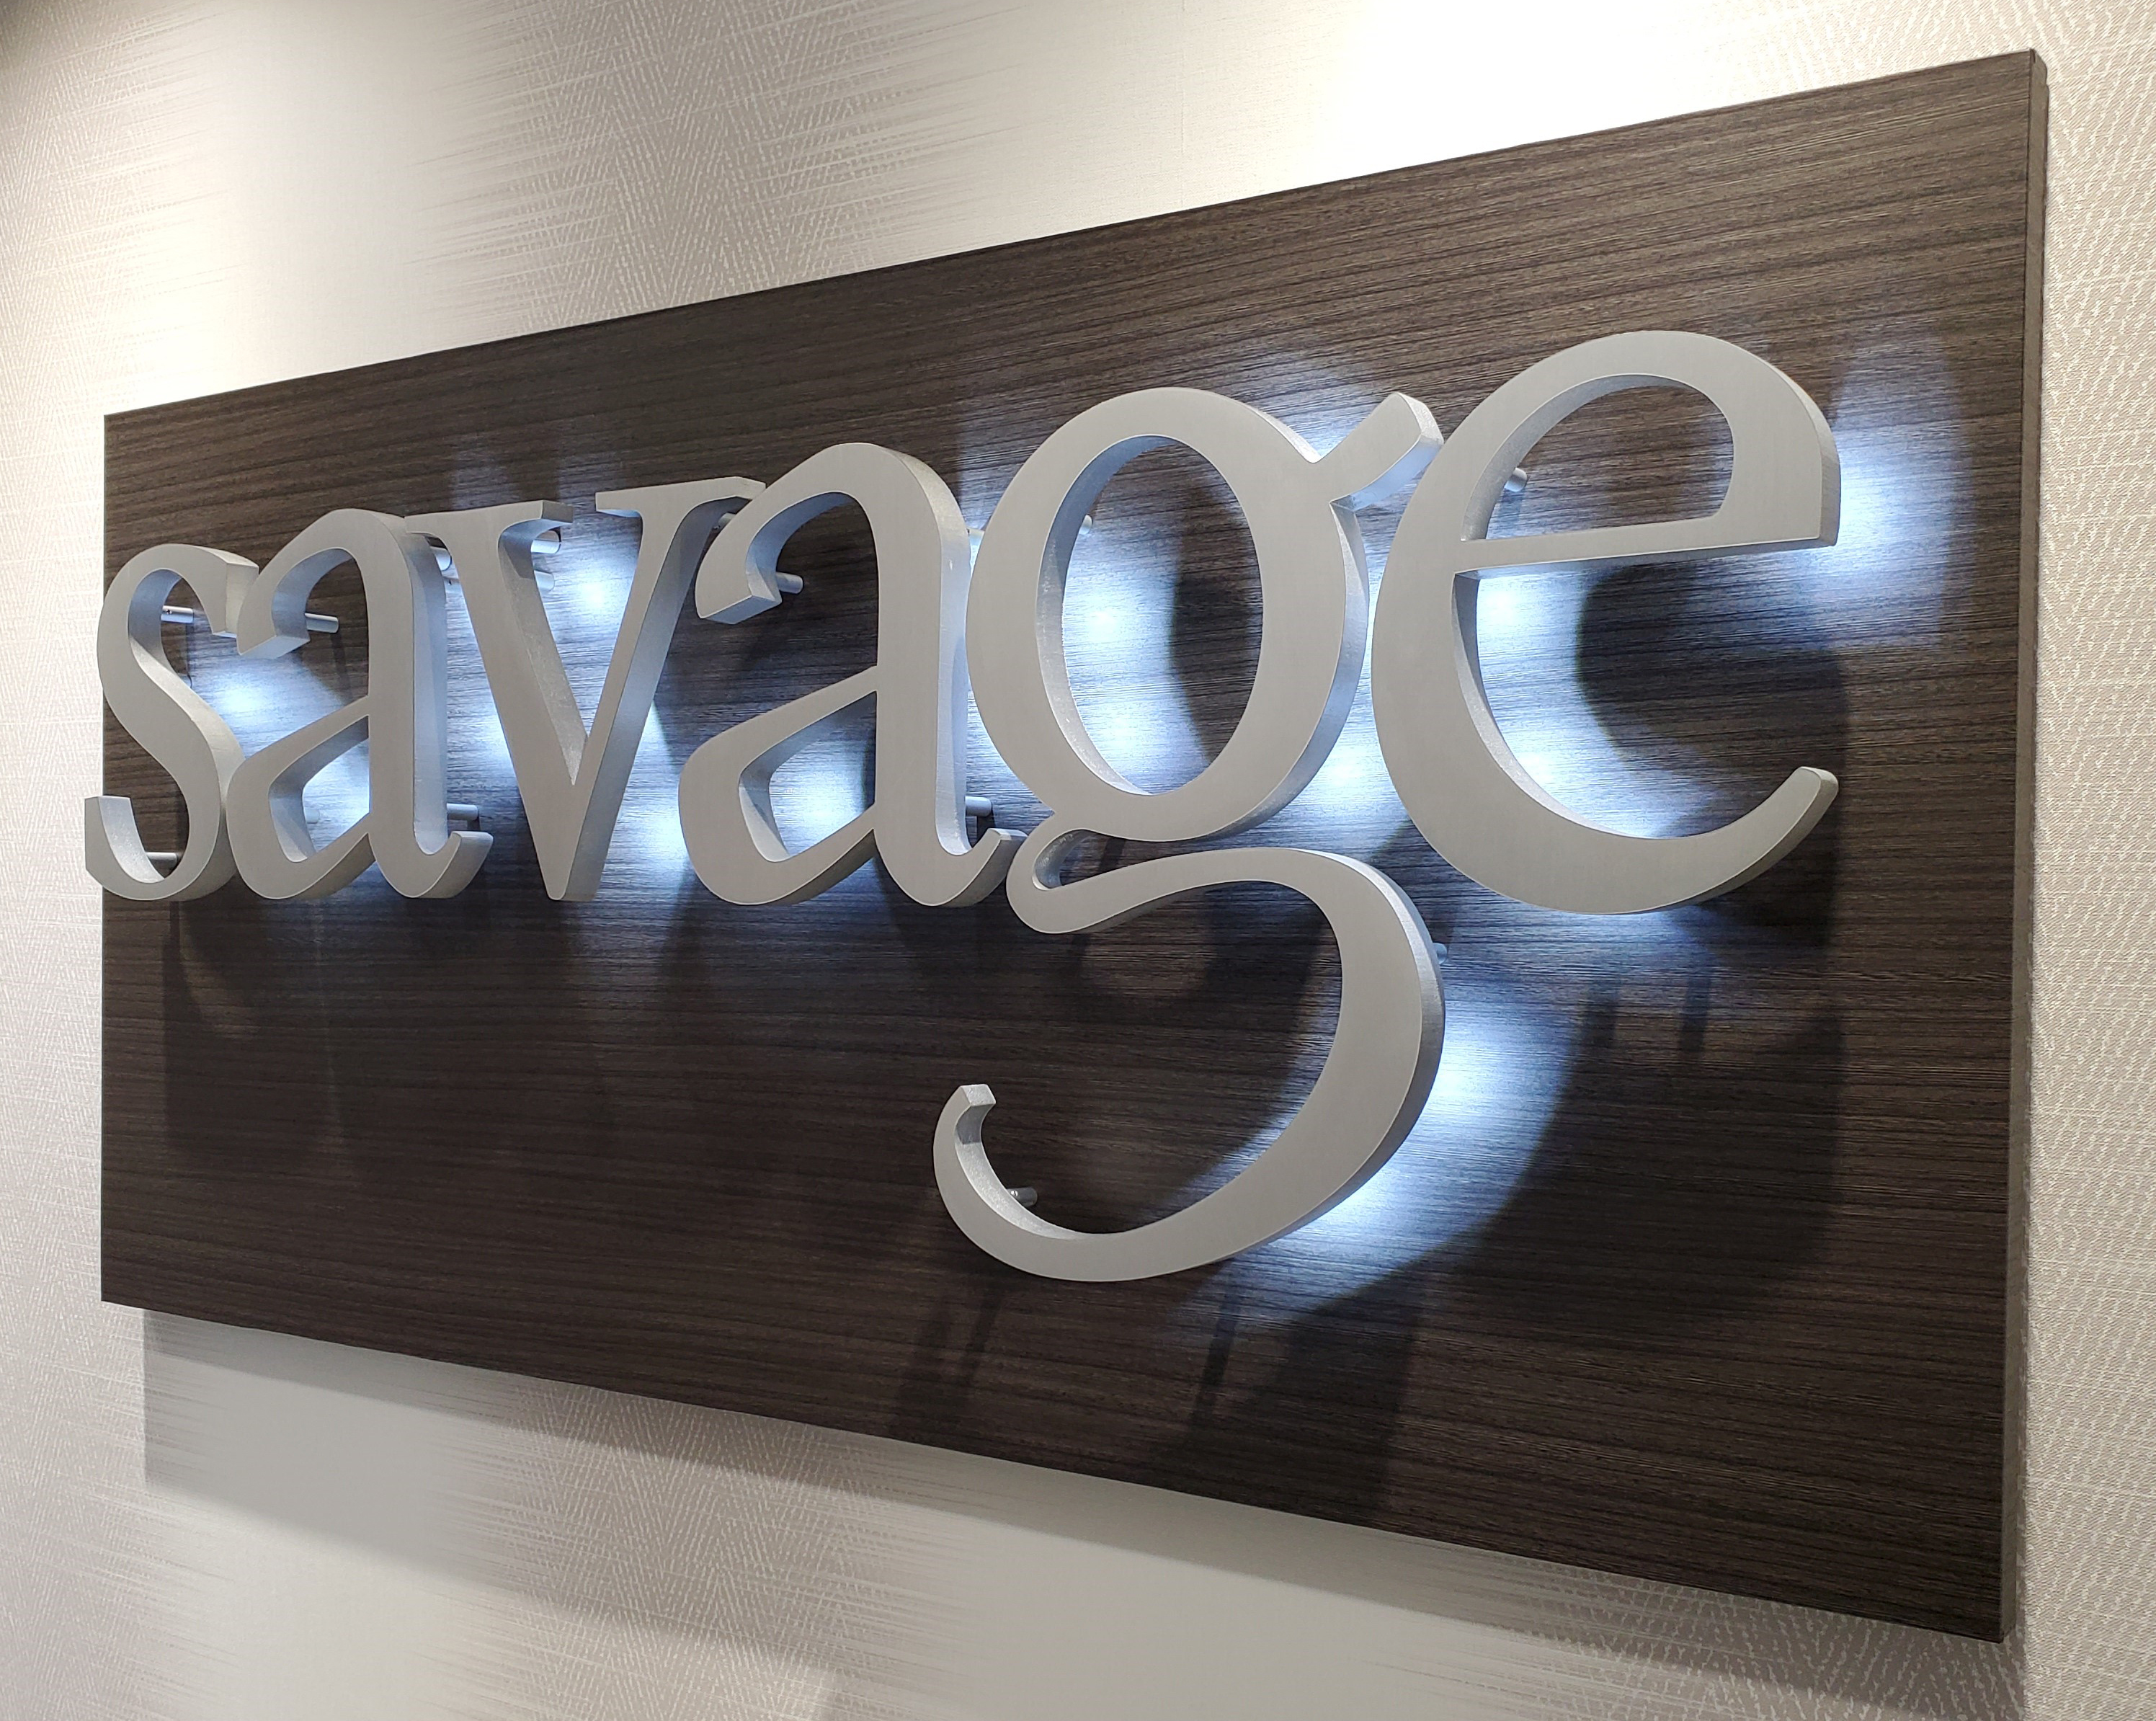 Savage earns national recognition for leadership in corporate philanthropy